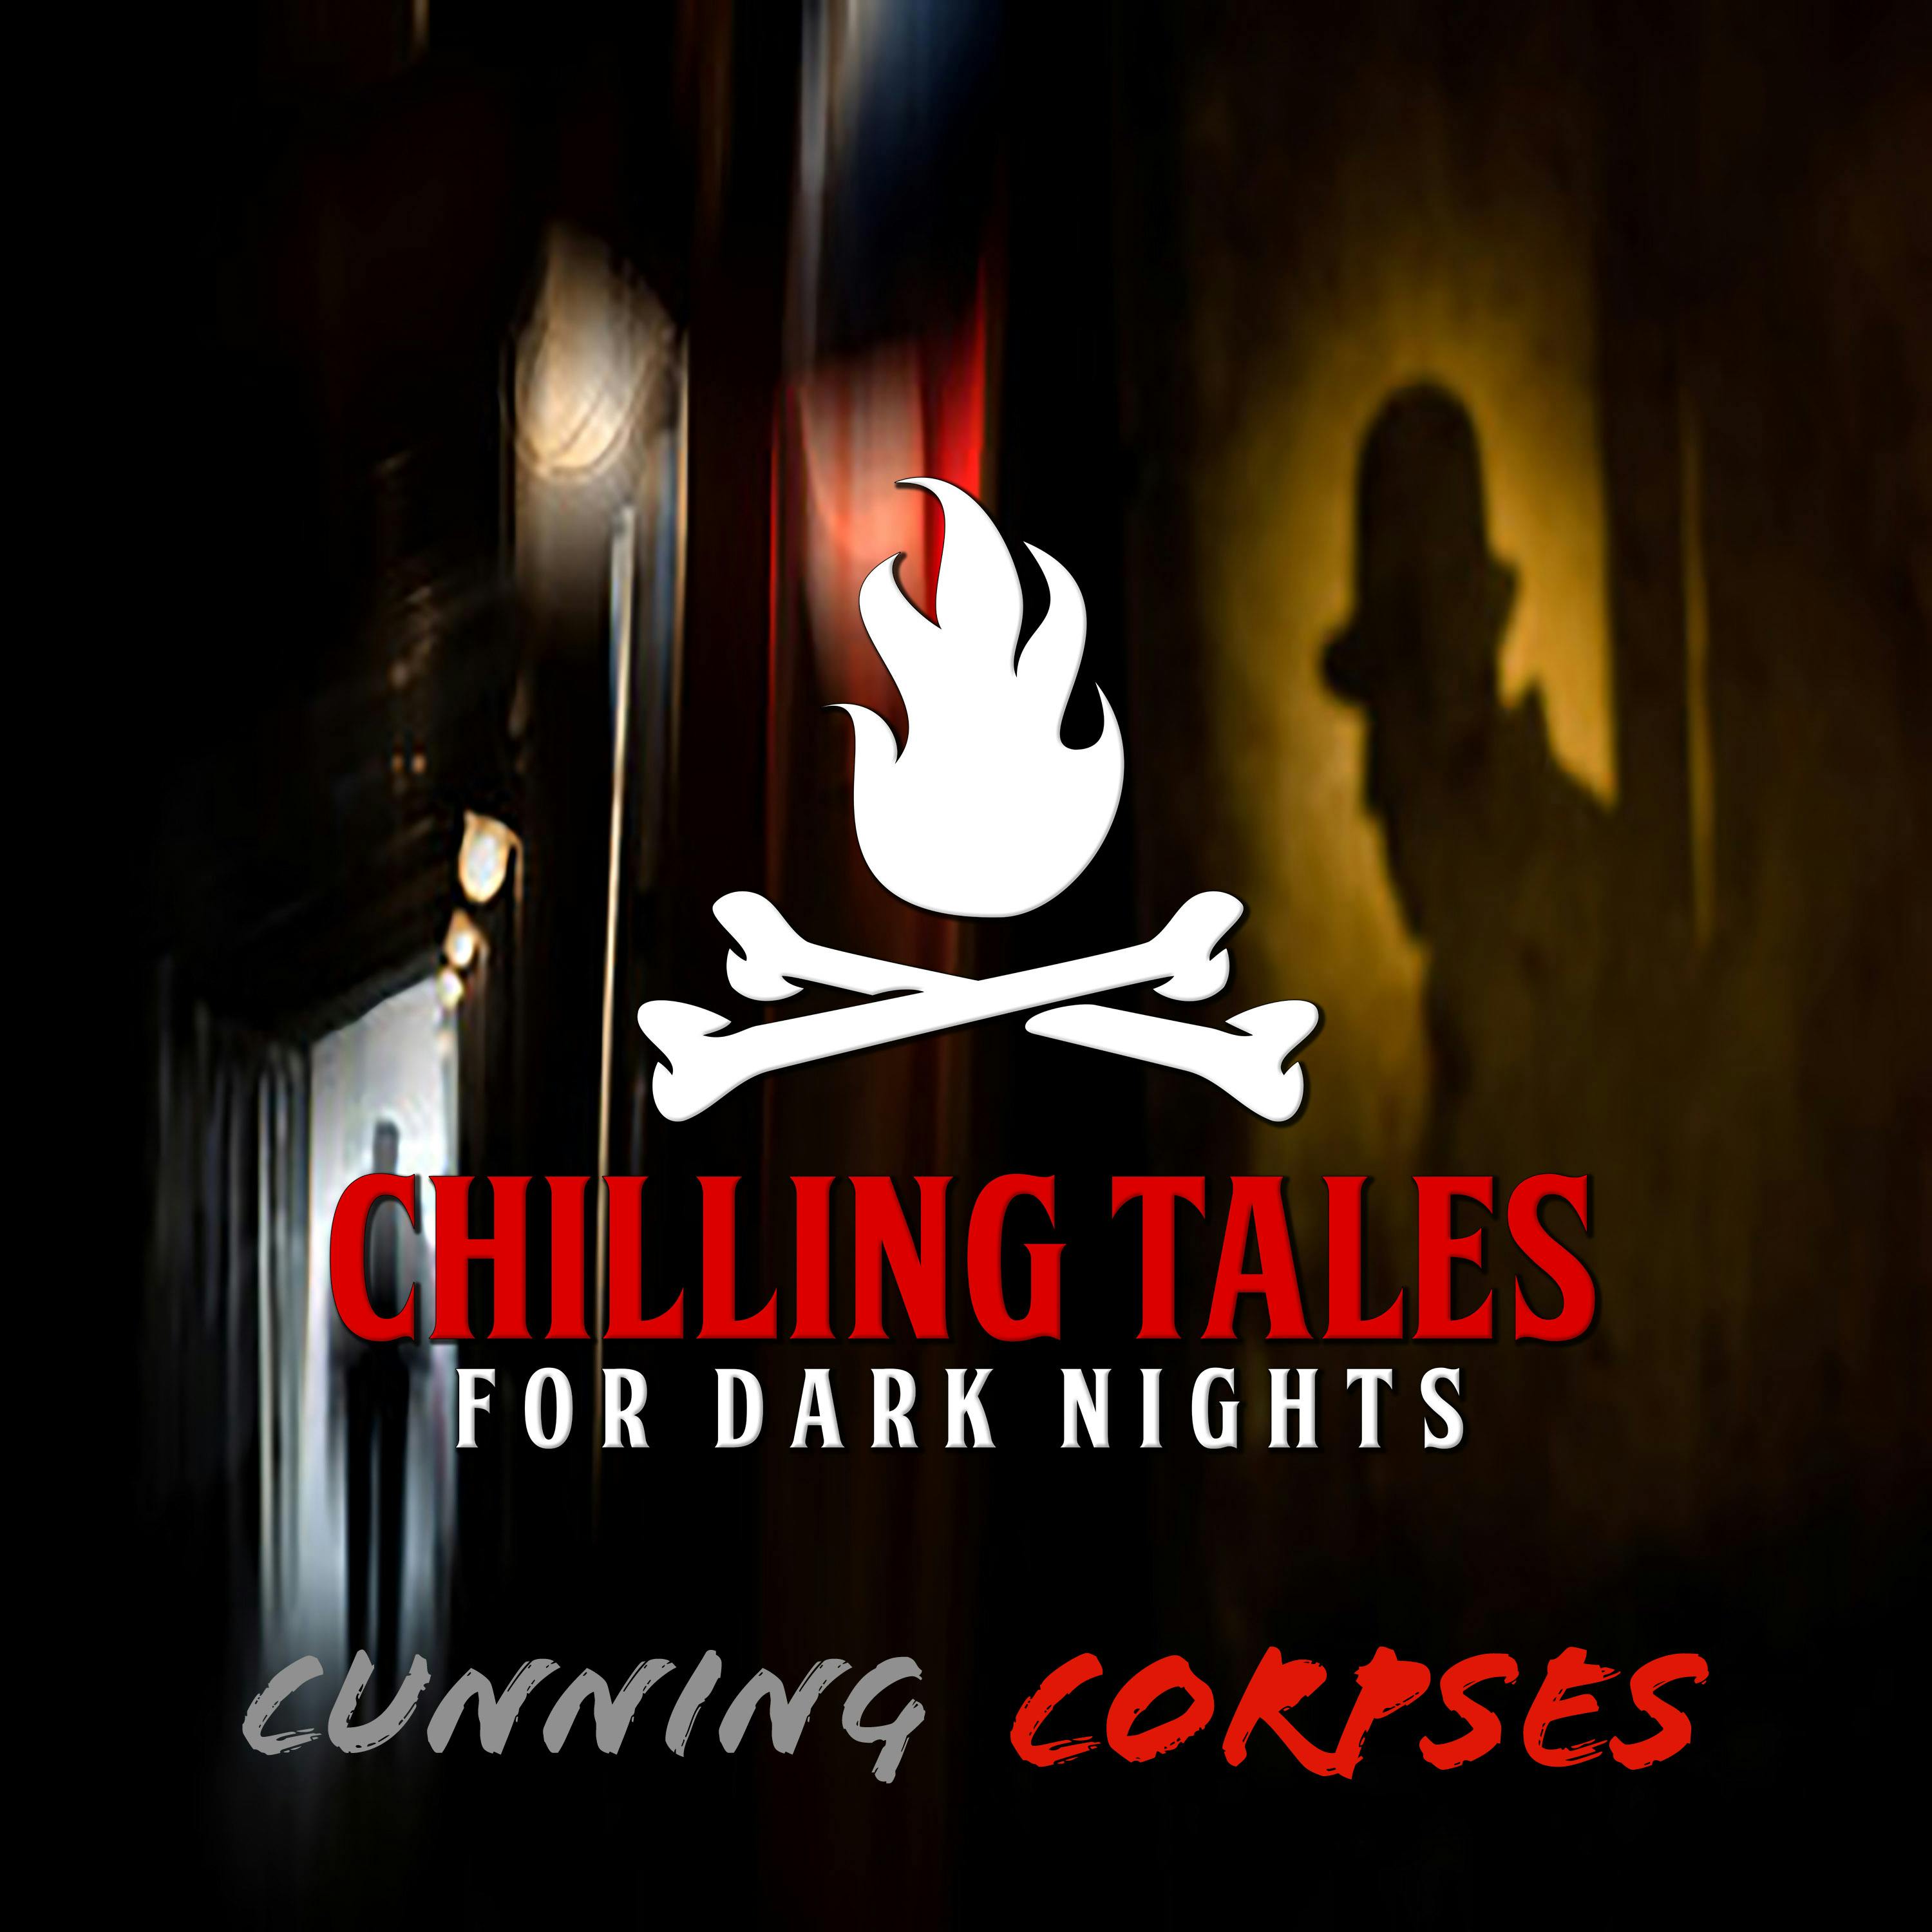 108: Cunning Corpses - Chilling Tales for Dark Nights